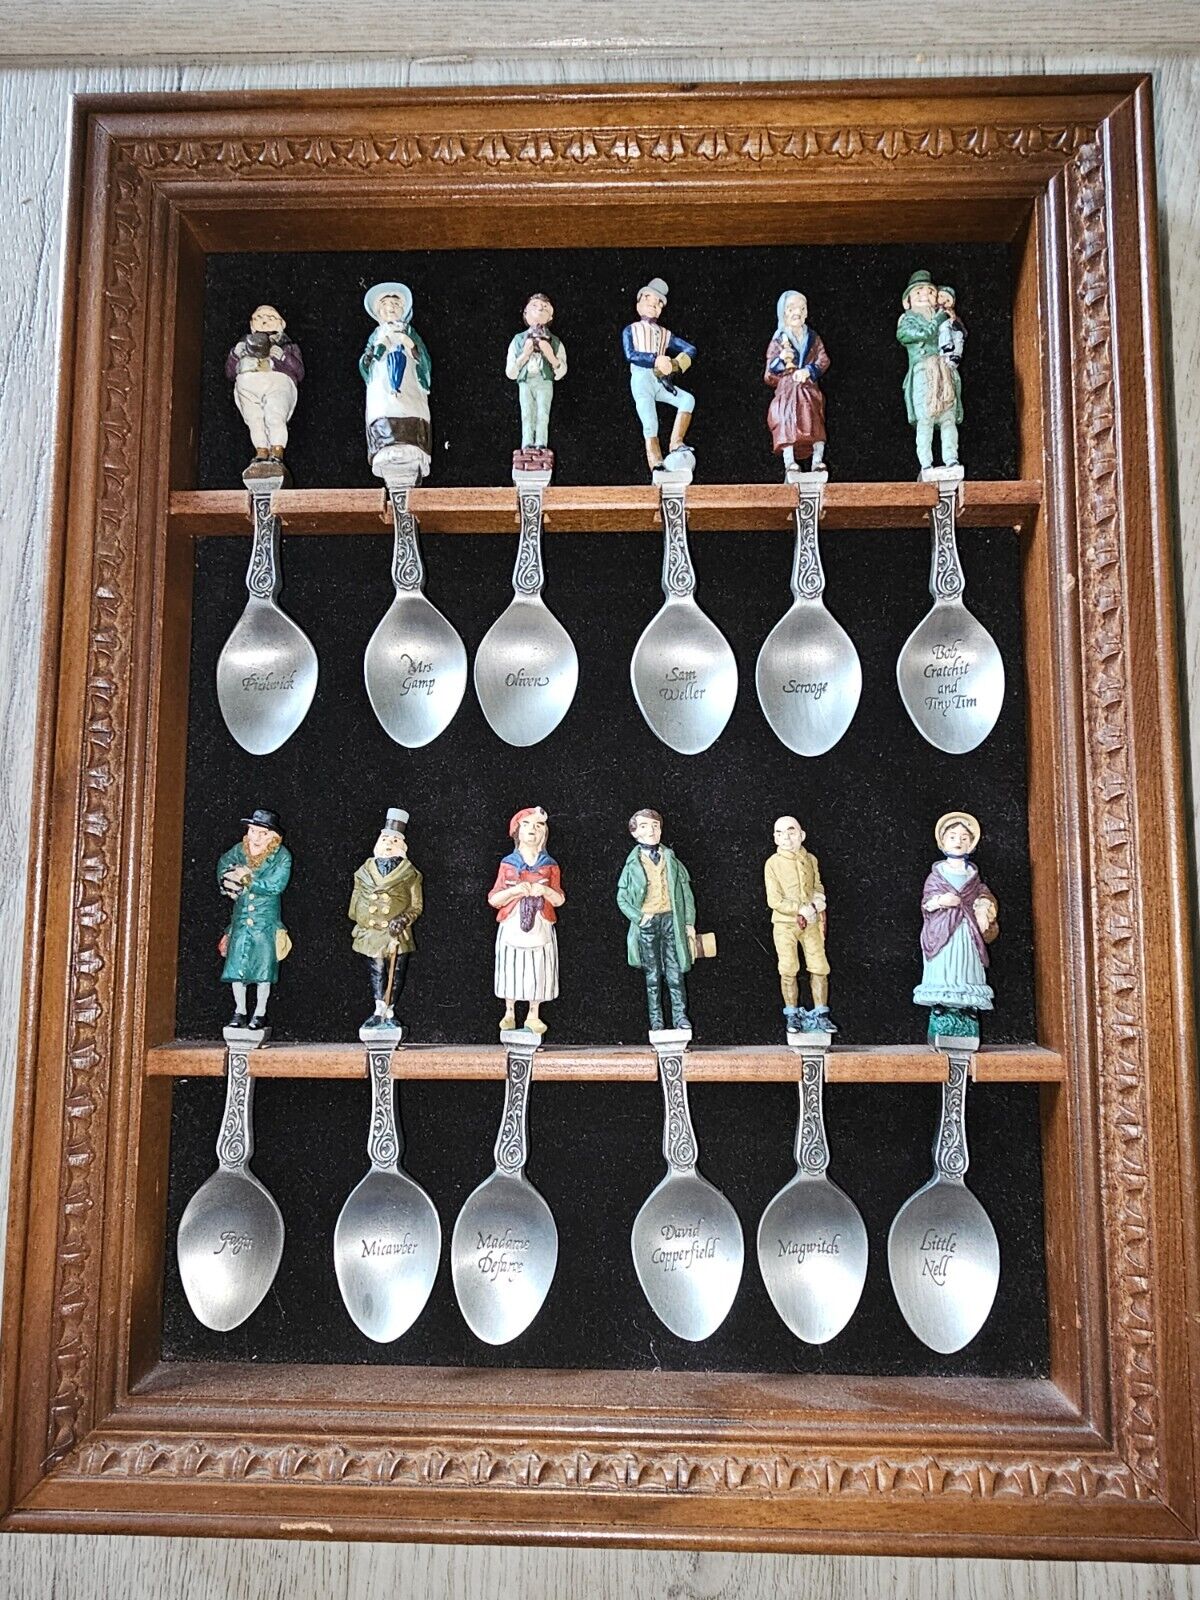 Franklin Mint Charles Dickens Pewter Spoon Set In Display Case 12 Characters